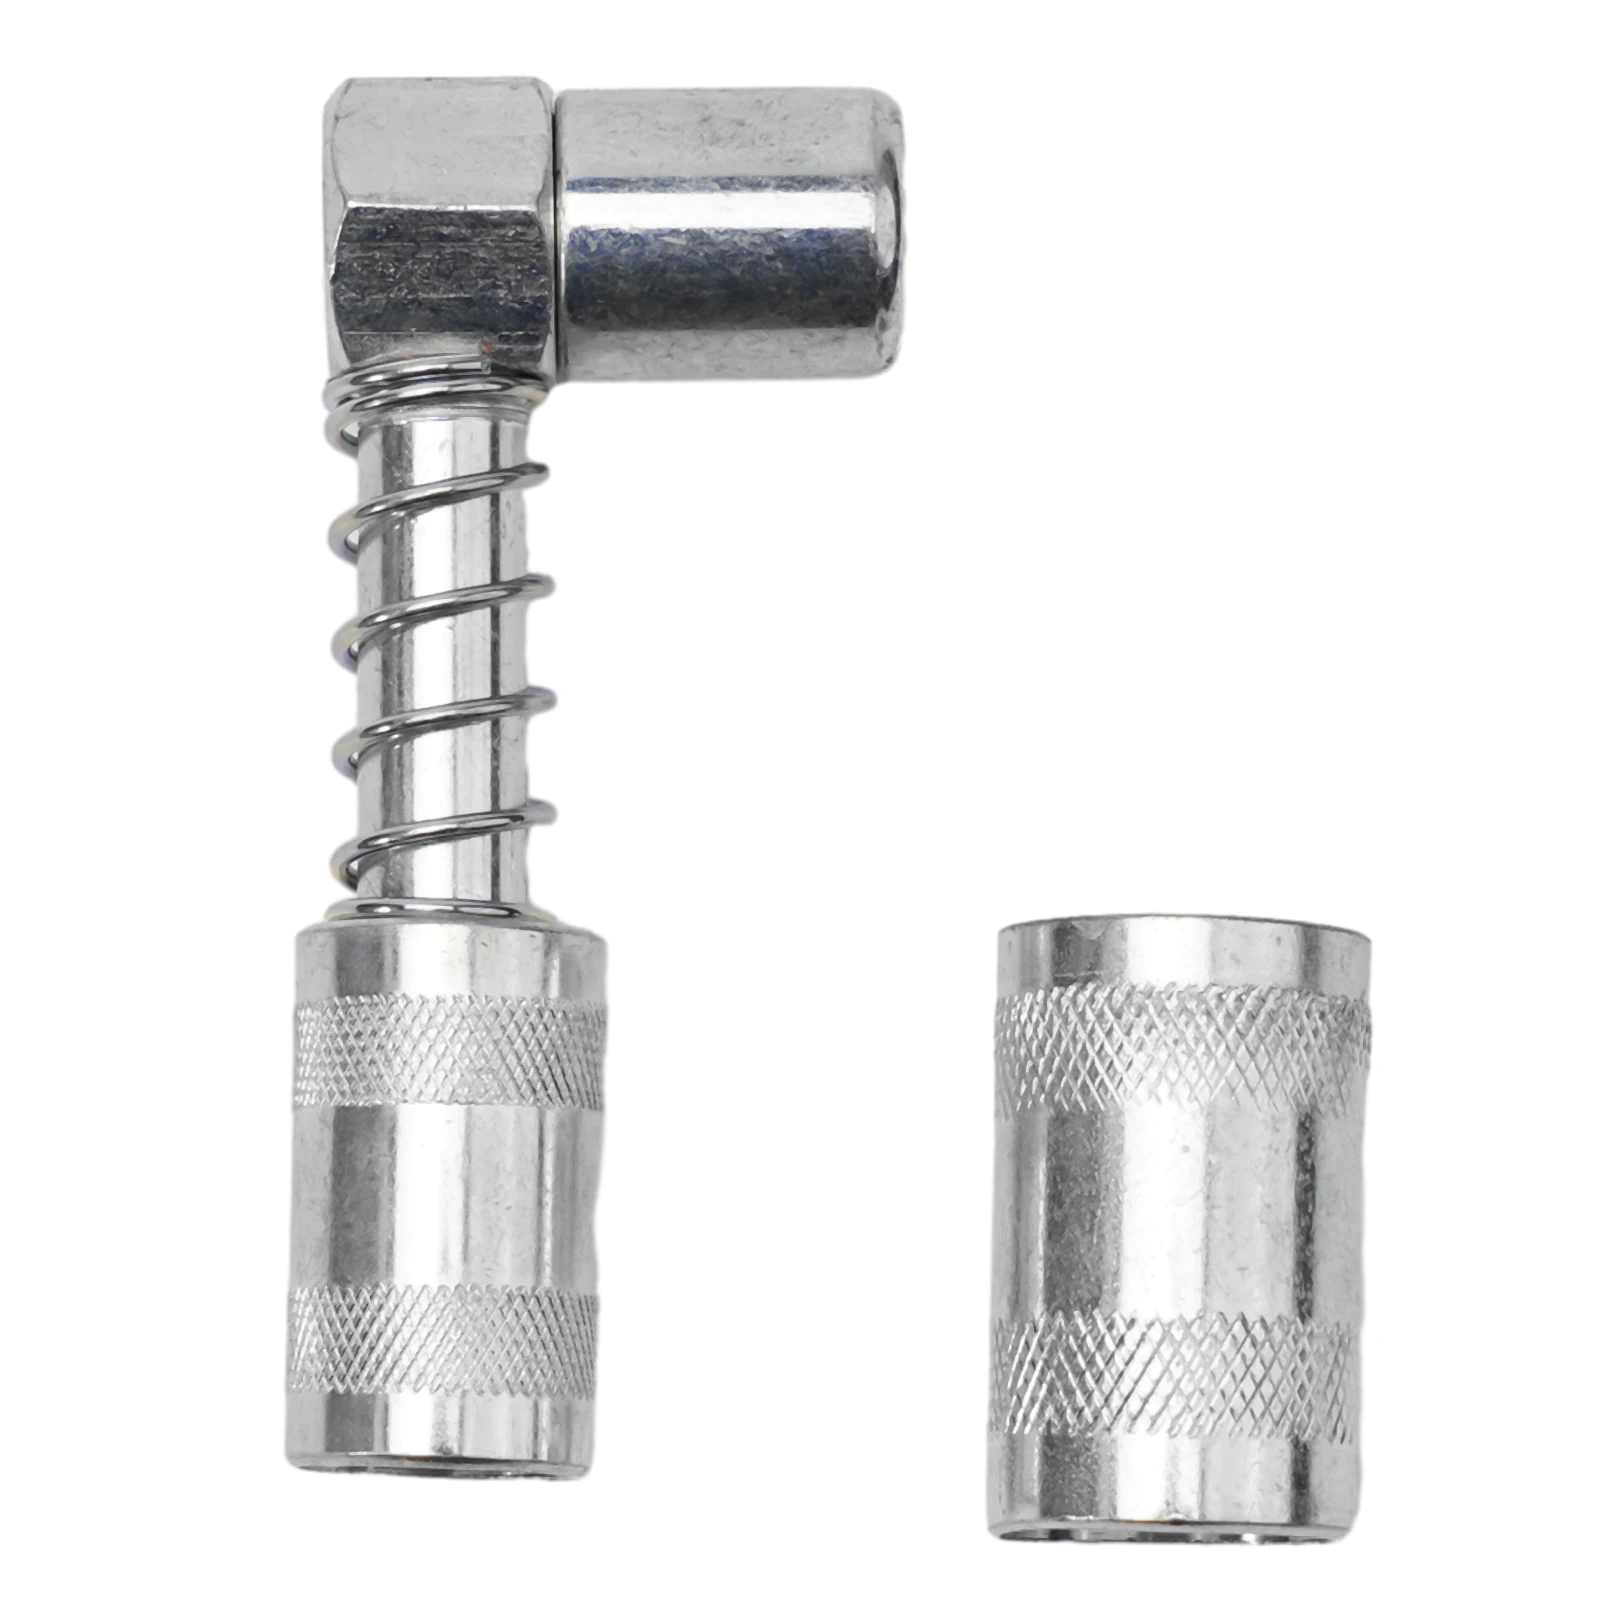 

Reliable 90 Degree Grease Nozzle Adapter 3 Jaw Coupler Tool Spring Loaded Sleeve Locks Durable Carbon Steel Material